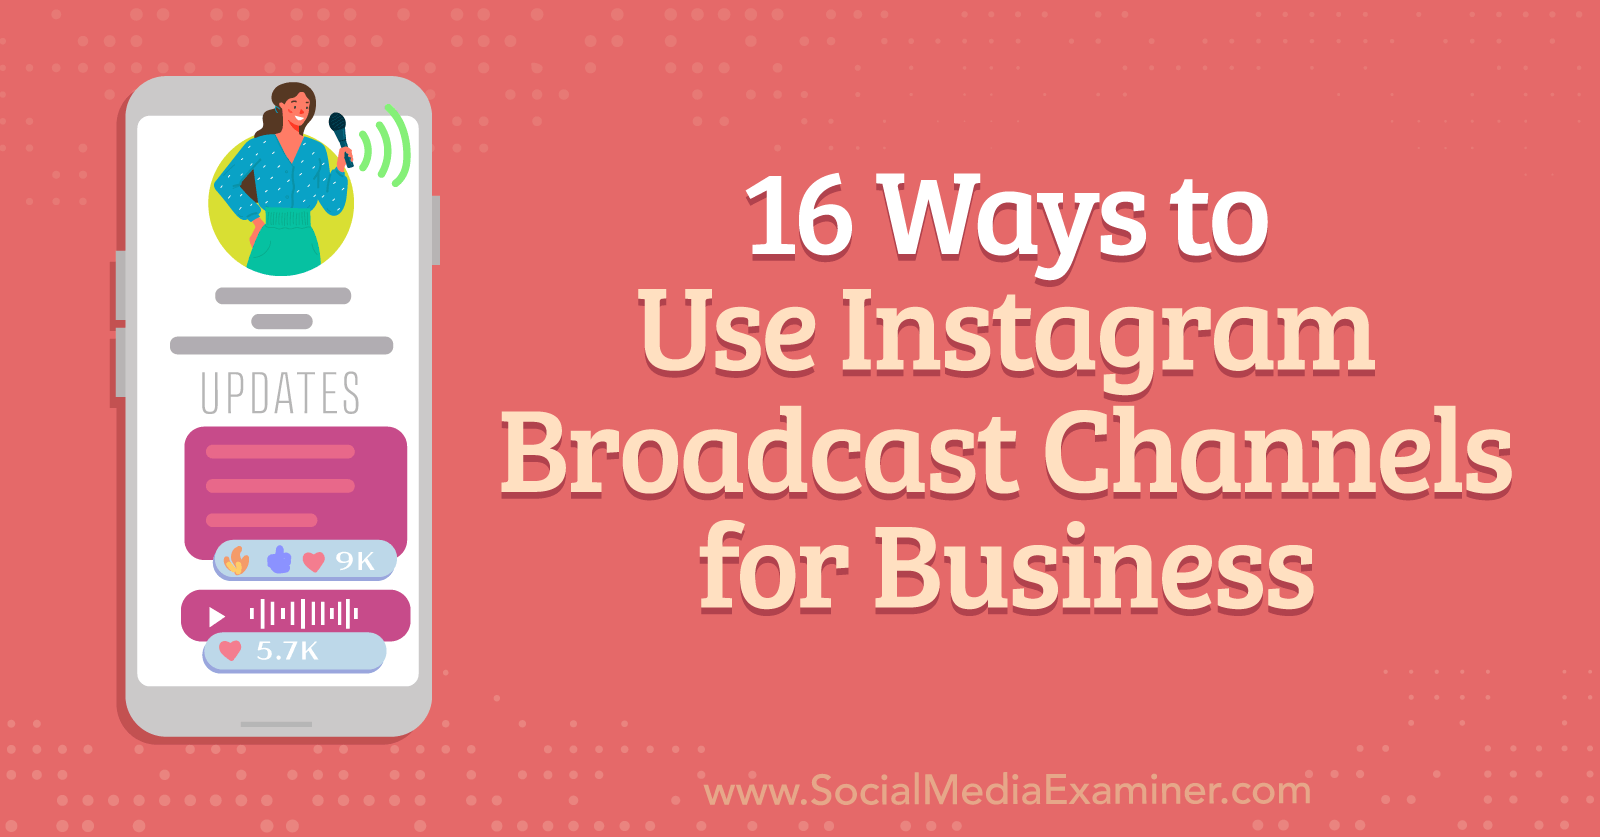 16 Ways to Use Instagram Broadcast Channels for Business by Social Media Examiner